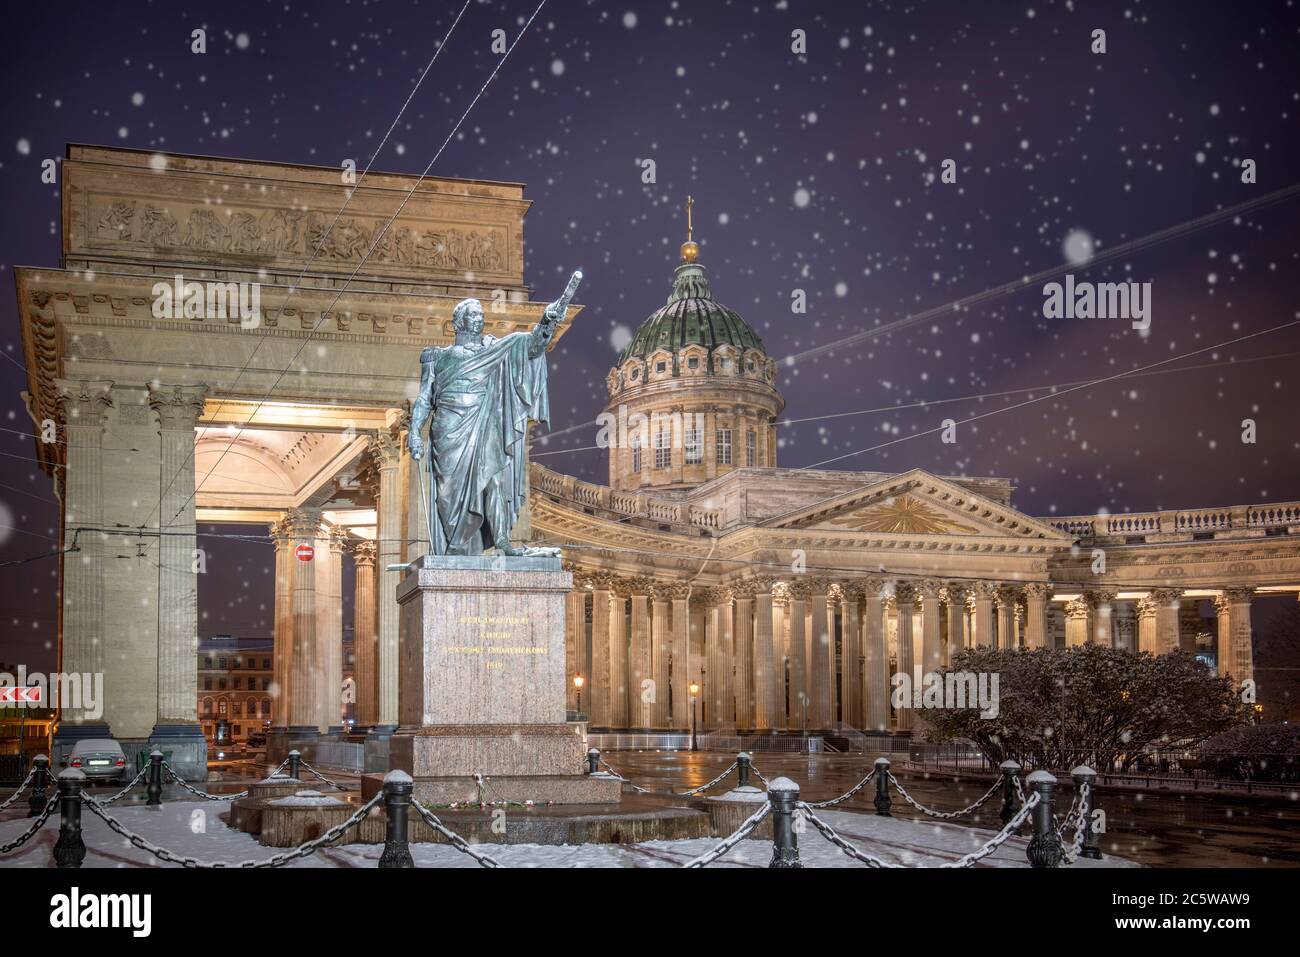 Kazan Cathedral or Kazanskiy Kafedralniy Sobor or the Cathedral of Our Lady of Kazan, is a Russian Orthodox Church in Saint Petersburg, Russia Stock Photo